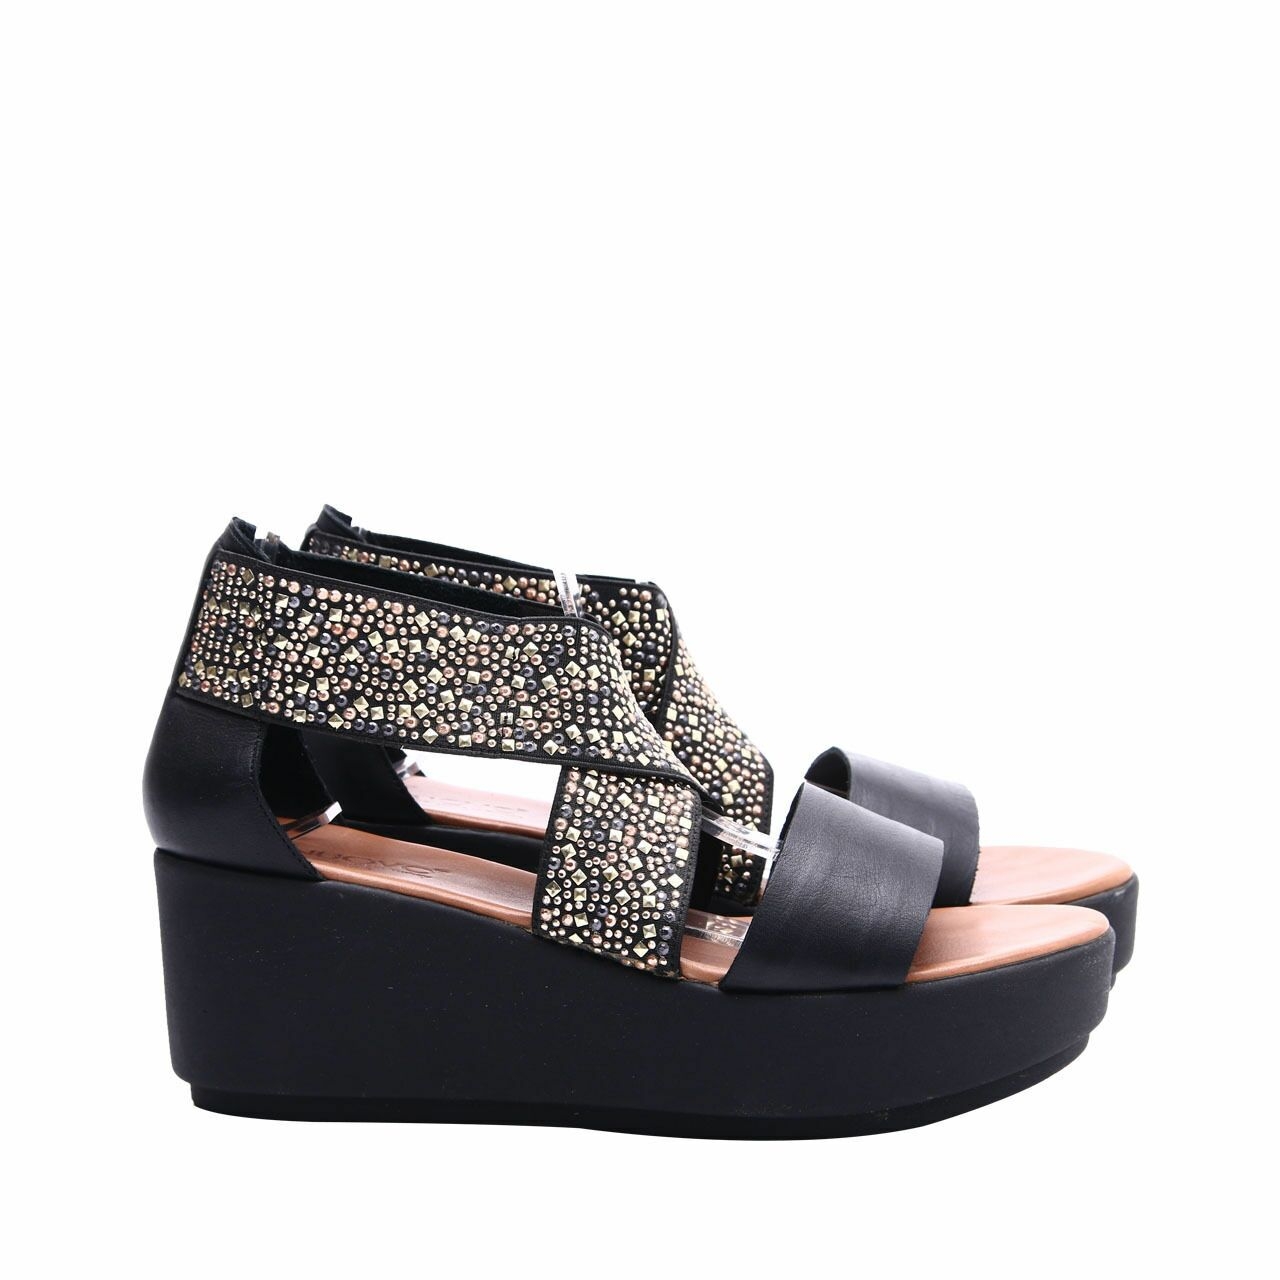 Inuovo Black Leather Sandals